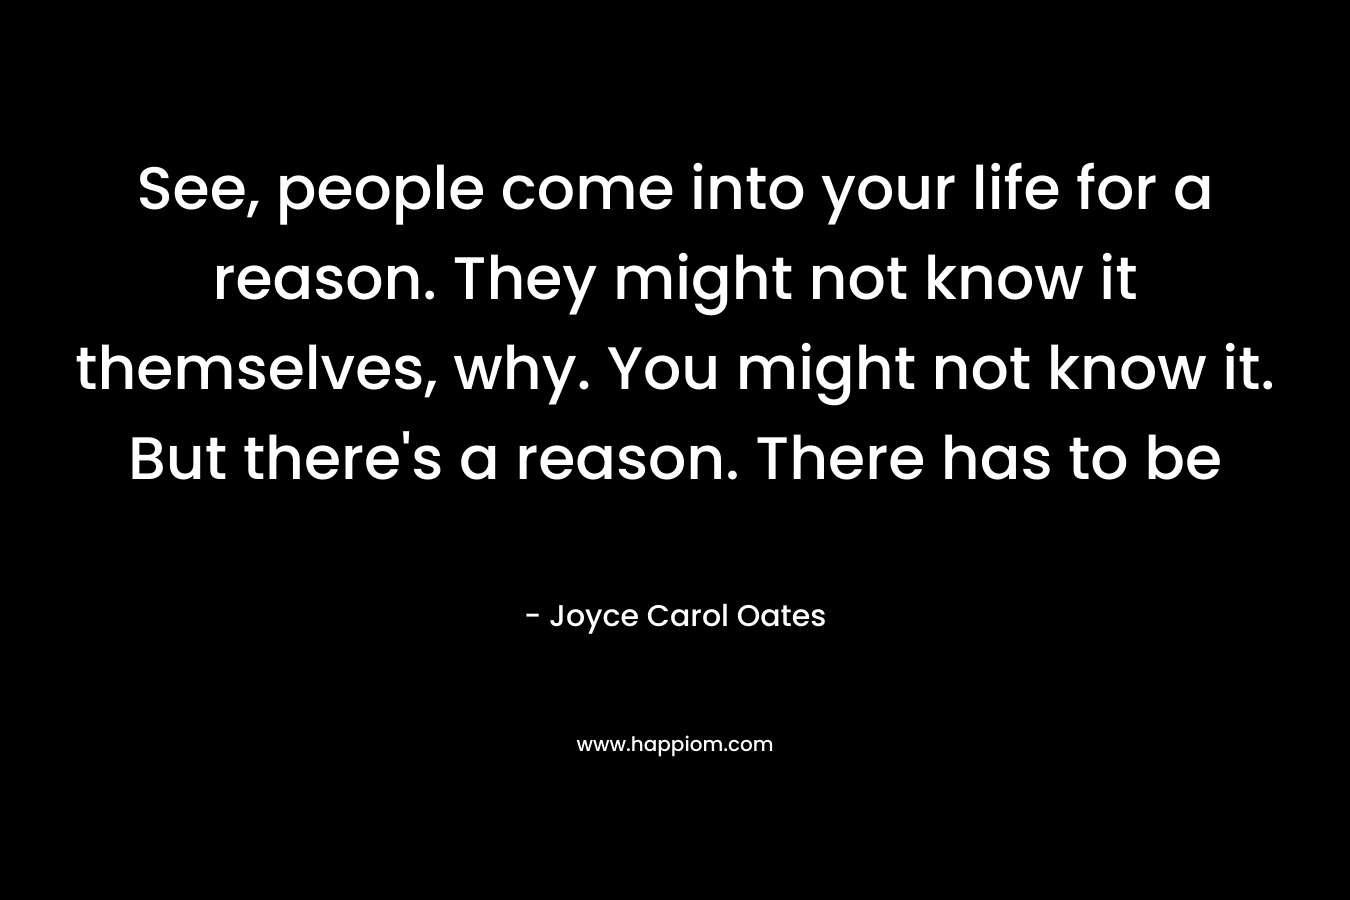 See, people come into your life for a reason. They might not know it themselves, why. You might not know it. But there's a reason. There has to be